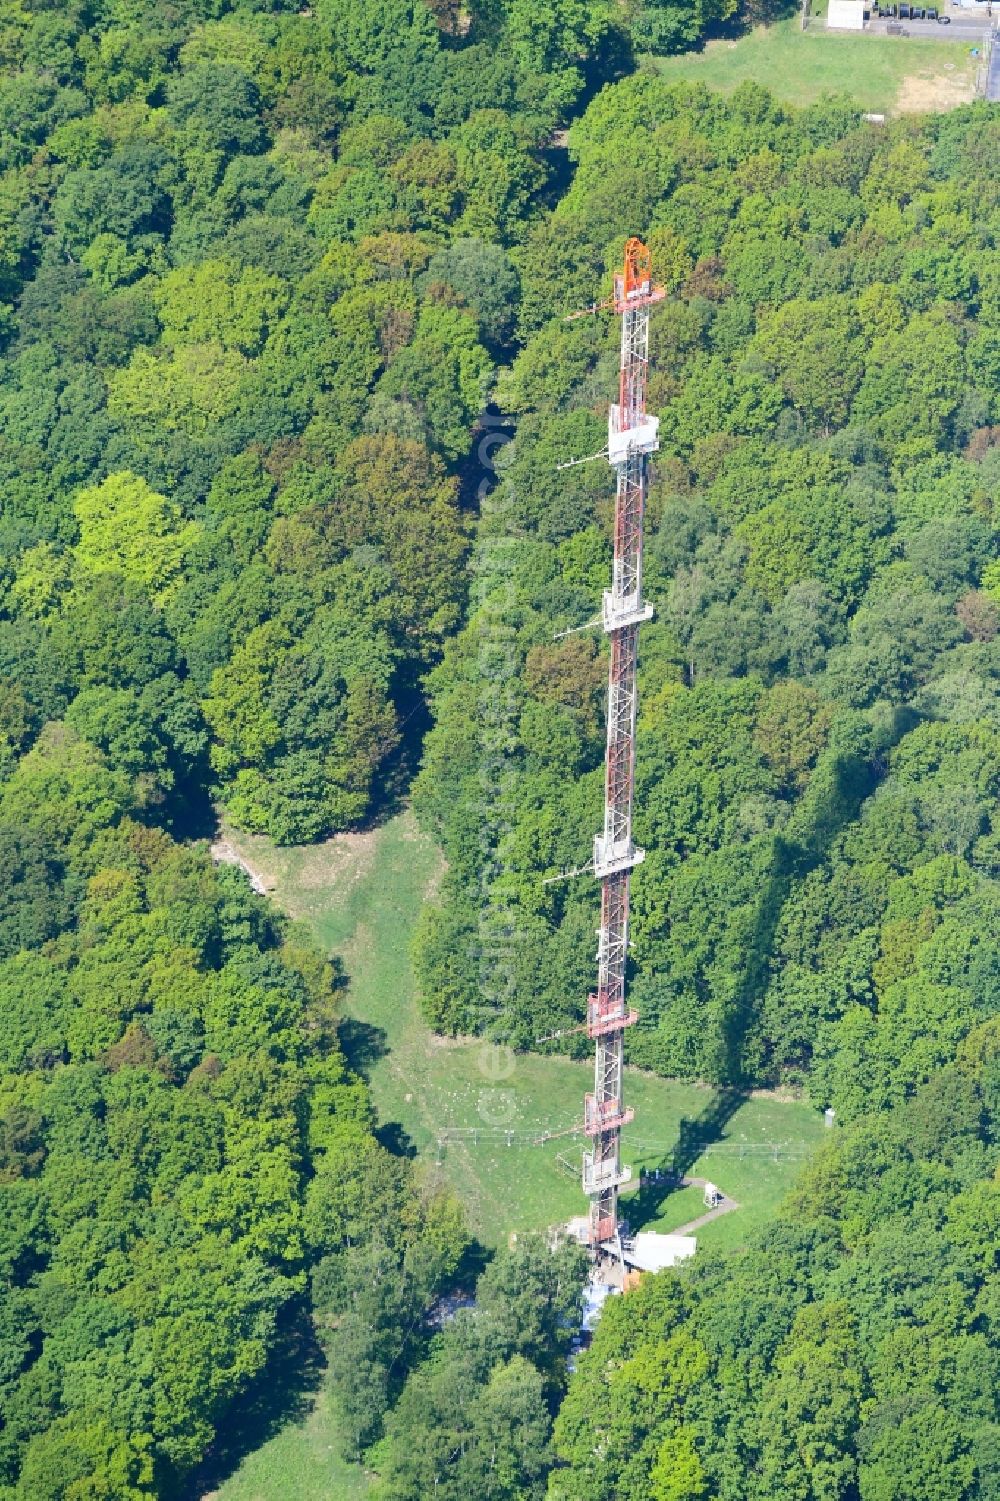 Jülich from above - Steel mast funkturm and transmission system as basic network transmitter in Juelich in the state North Rhine-Westphalia, Germany